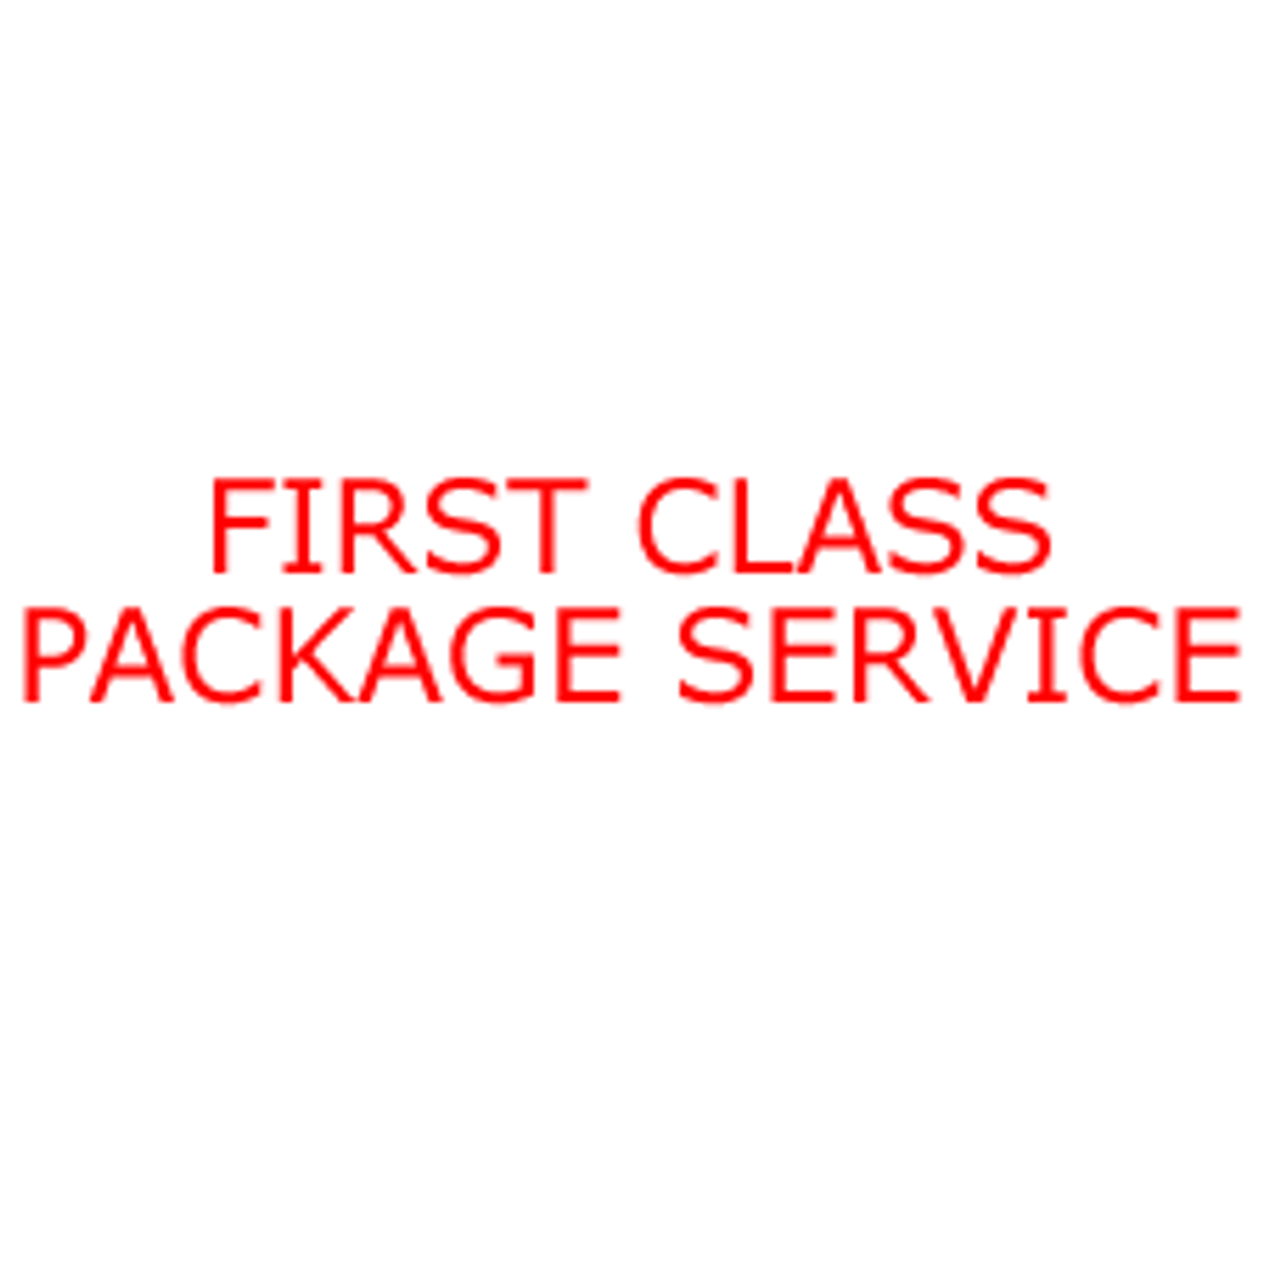 FIRST CLASS PACKAGE SERVICE Rubber Stamp for mail use self-inking